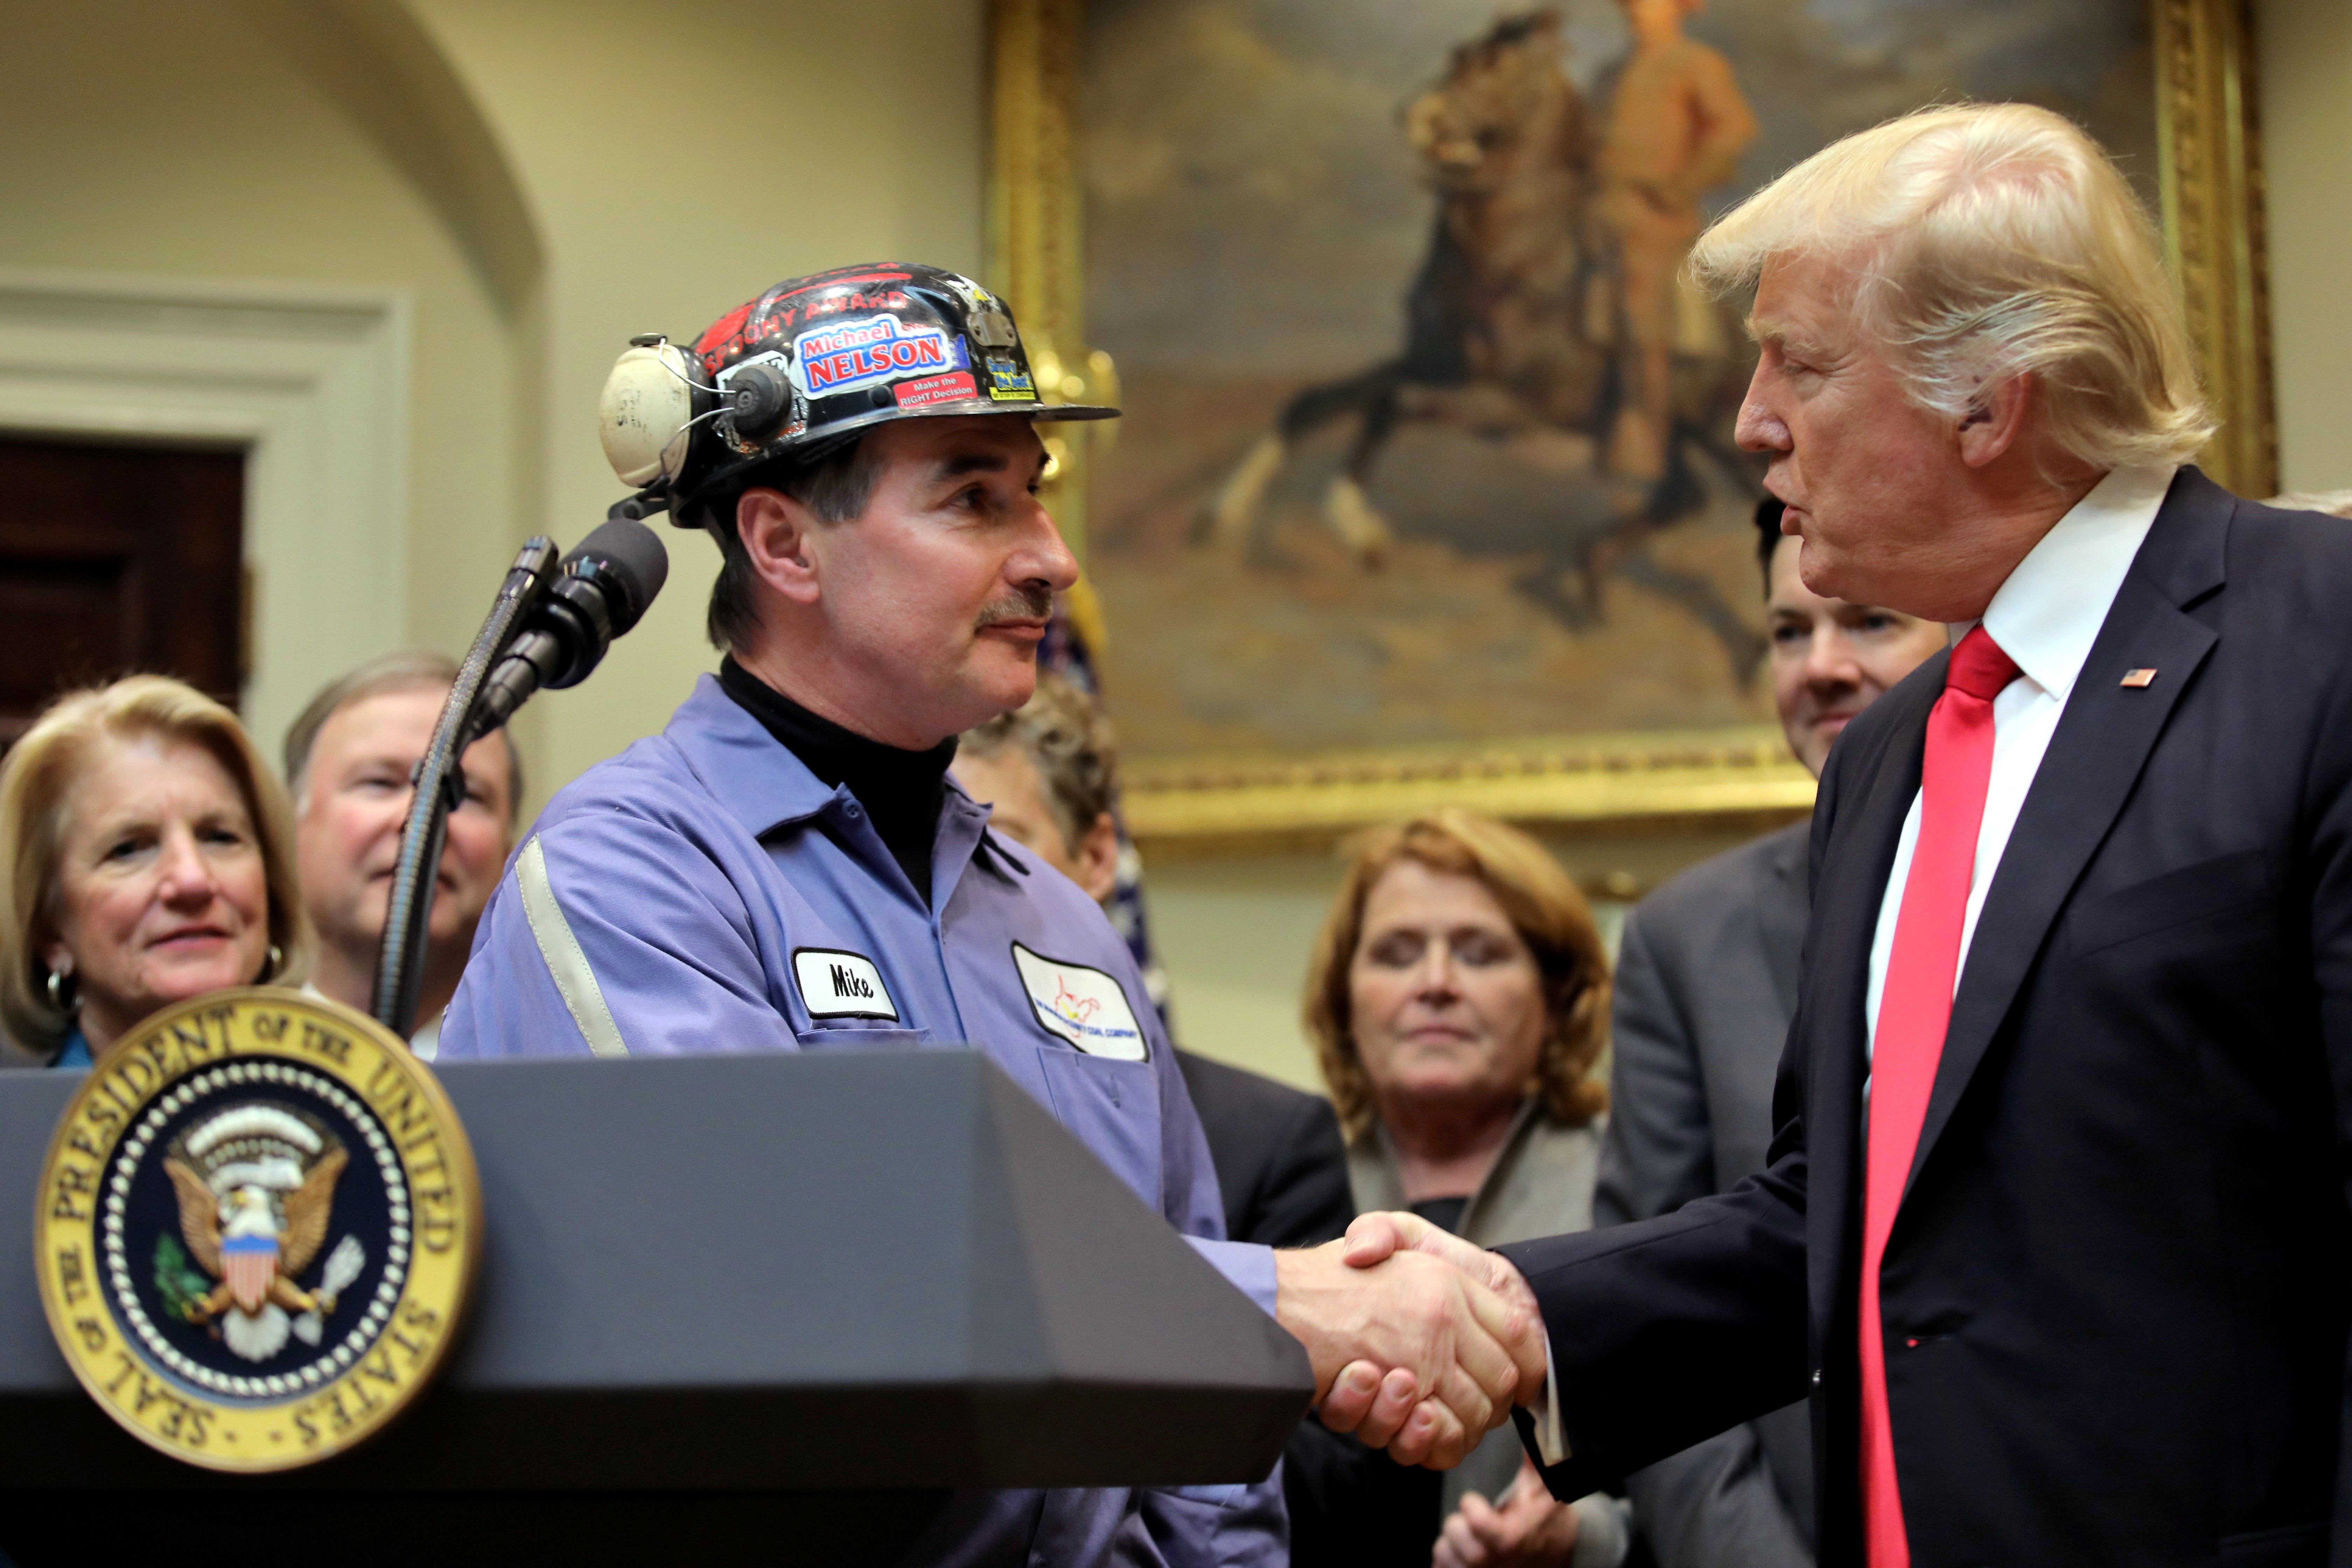 Michael Nelson, a coal miner worker shakes hands with U.S. President Donald Trump as he prepares to sign Resolution 38, at the White House in Washington, U.S.